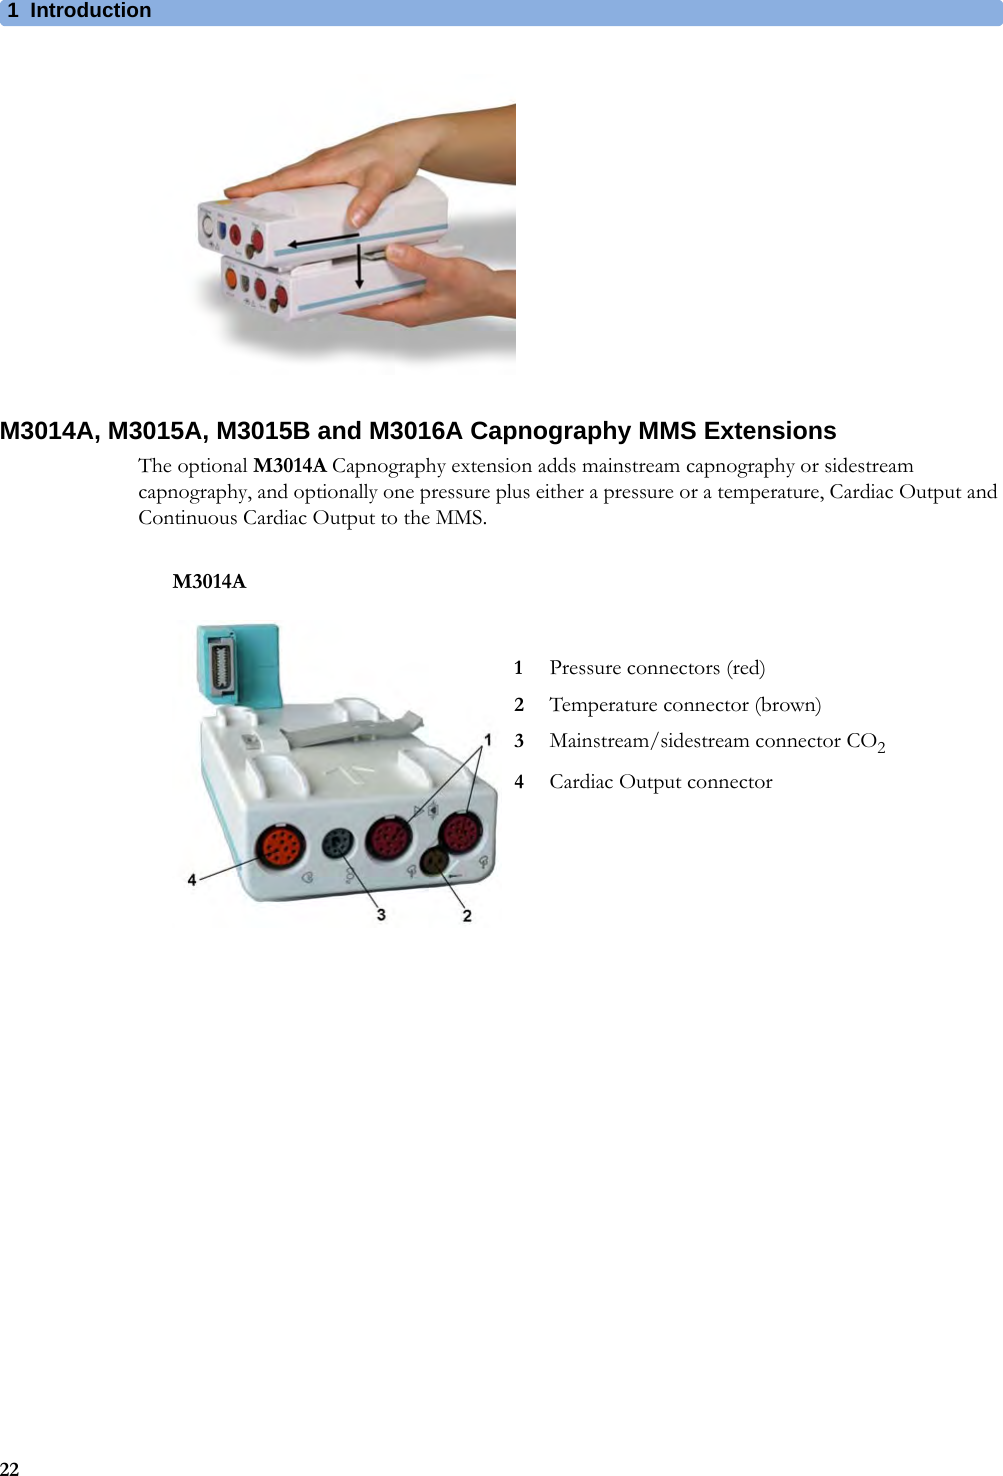 1Introduction22M3014A, M3015A, M3015B and M3016A Capnography MMS ExtensionsThe optional M3014A Capnography extension adds mainstream capnography or sidestream capnography, and optionally one pressure plus either a pressure or a temperature, Cardiac Output and Continuous Cardiac Output to the MMS.M3014A1Pressure connectors (red)2Temperature connector (brown)3Mainstream/sidestream connector CO24Cardiac Output connector